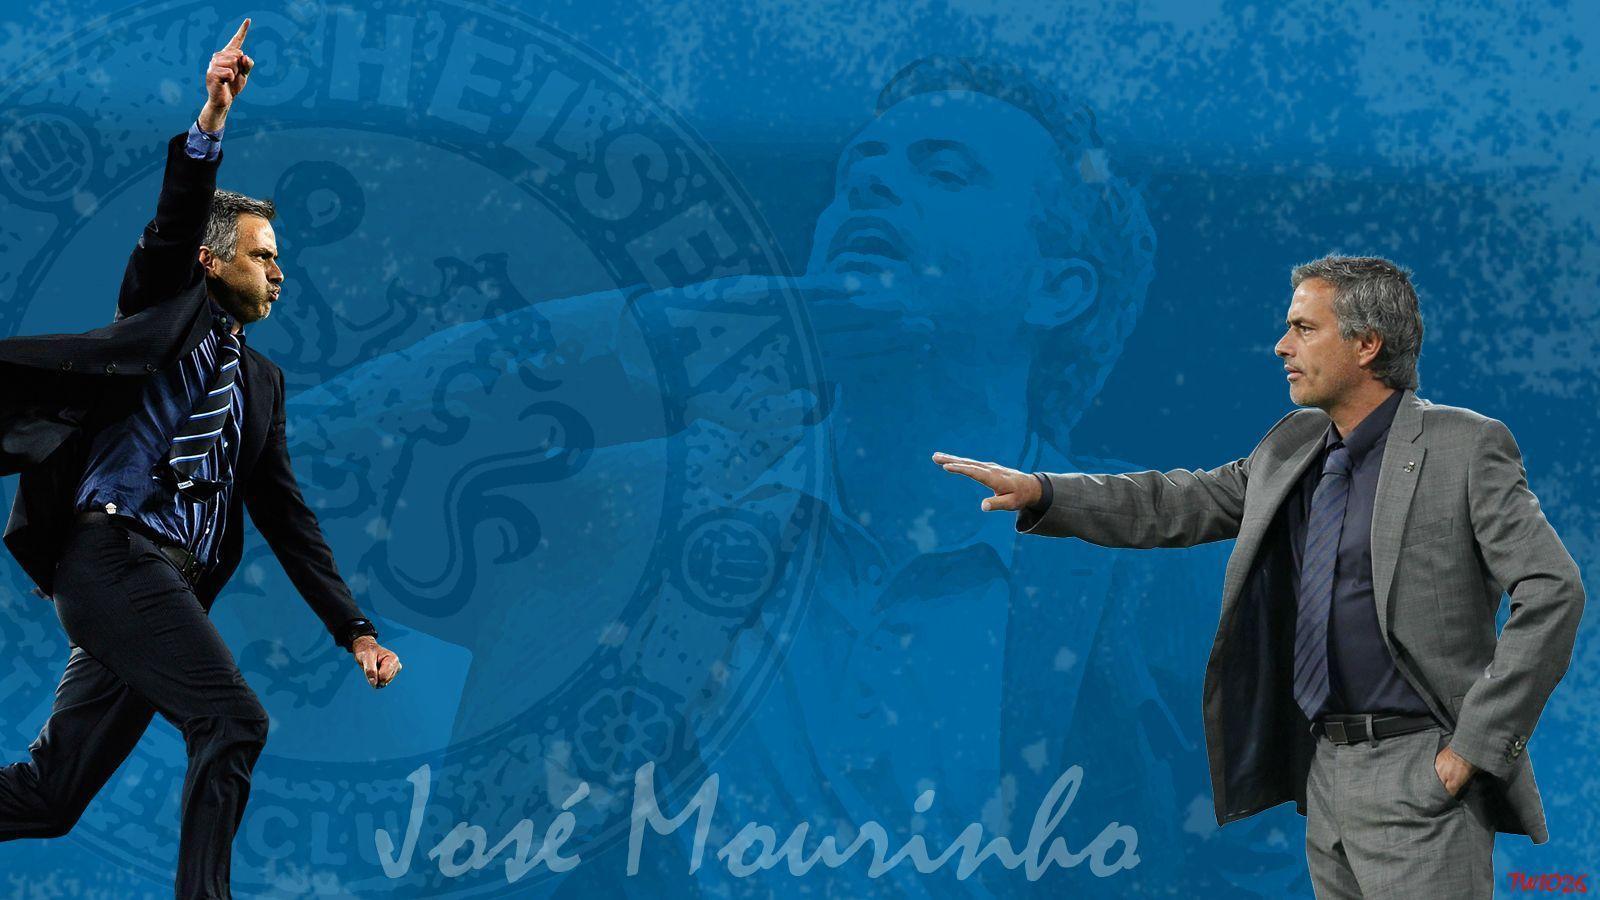 Policy Linking Jose Mourinho HD Wallpaper Collection 640 X 360 68